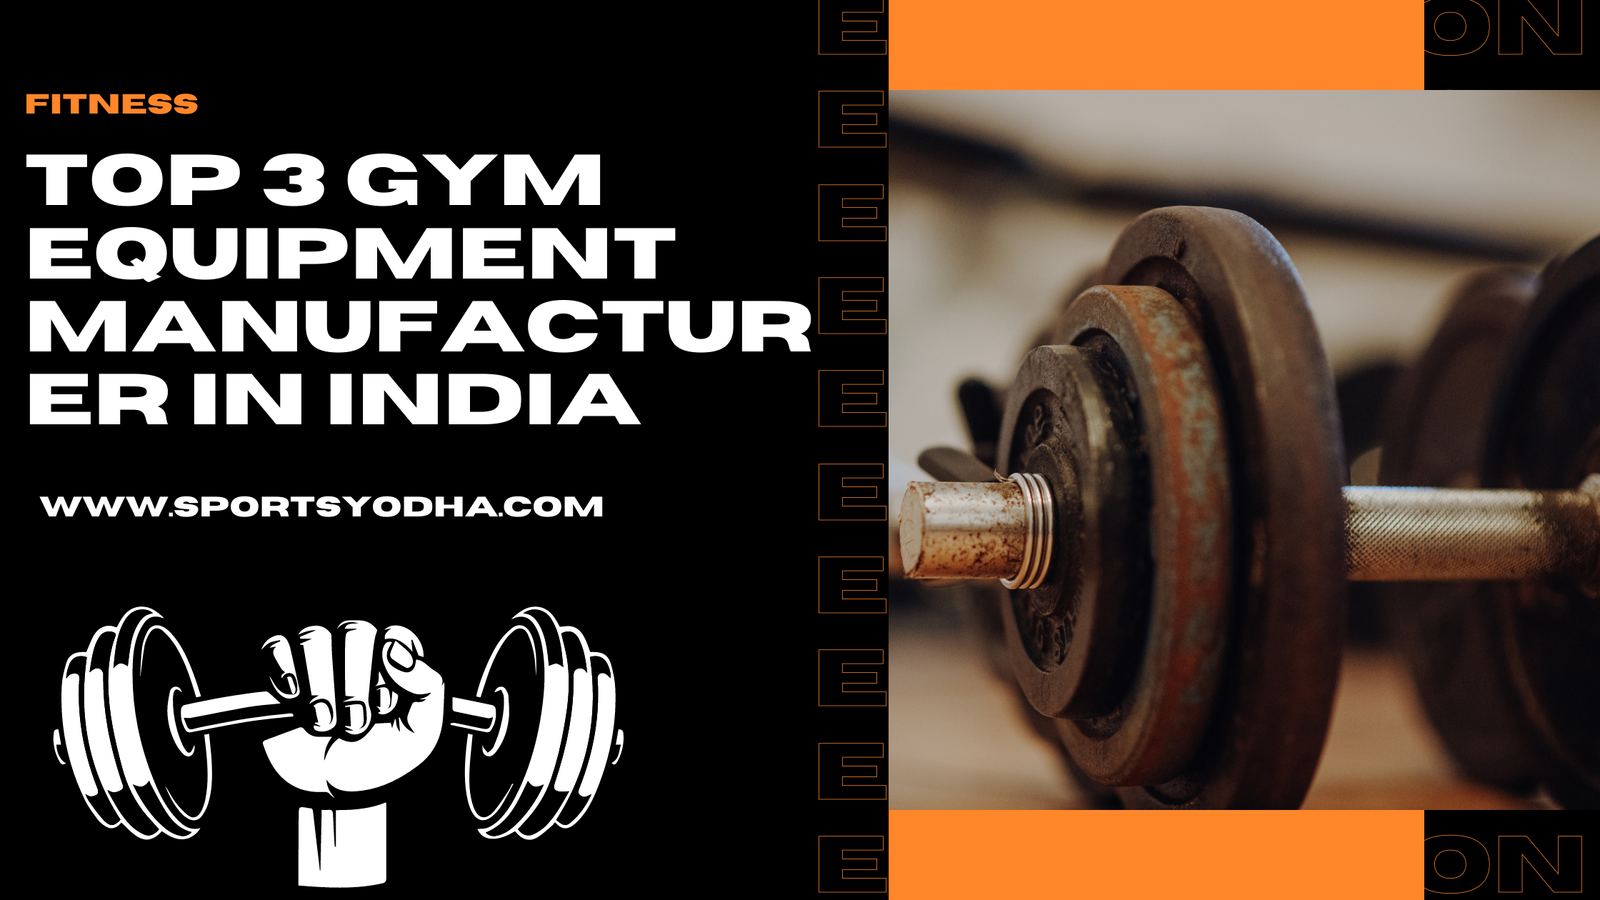 Top 3 gym equipment brand in India